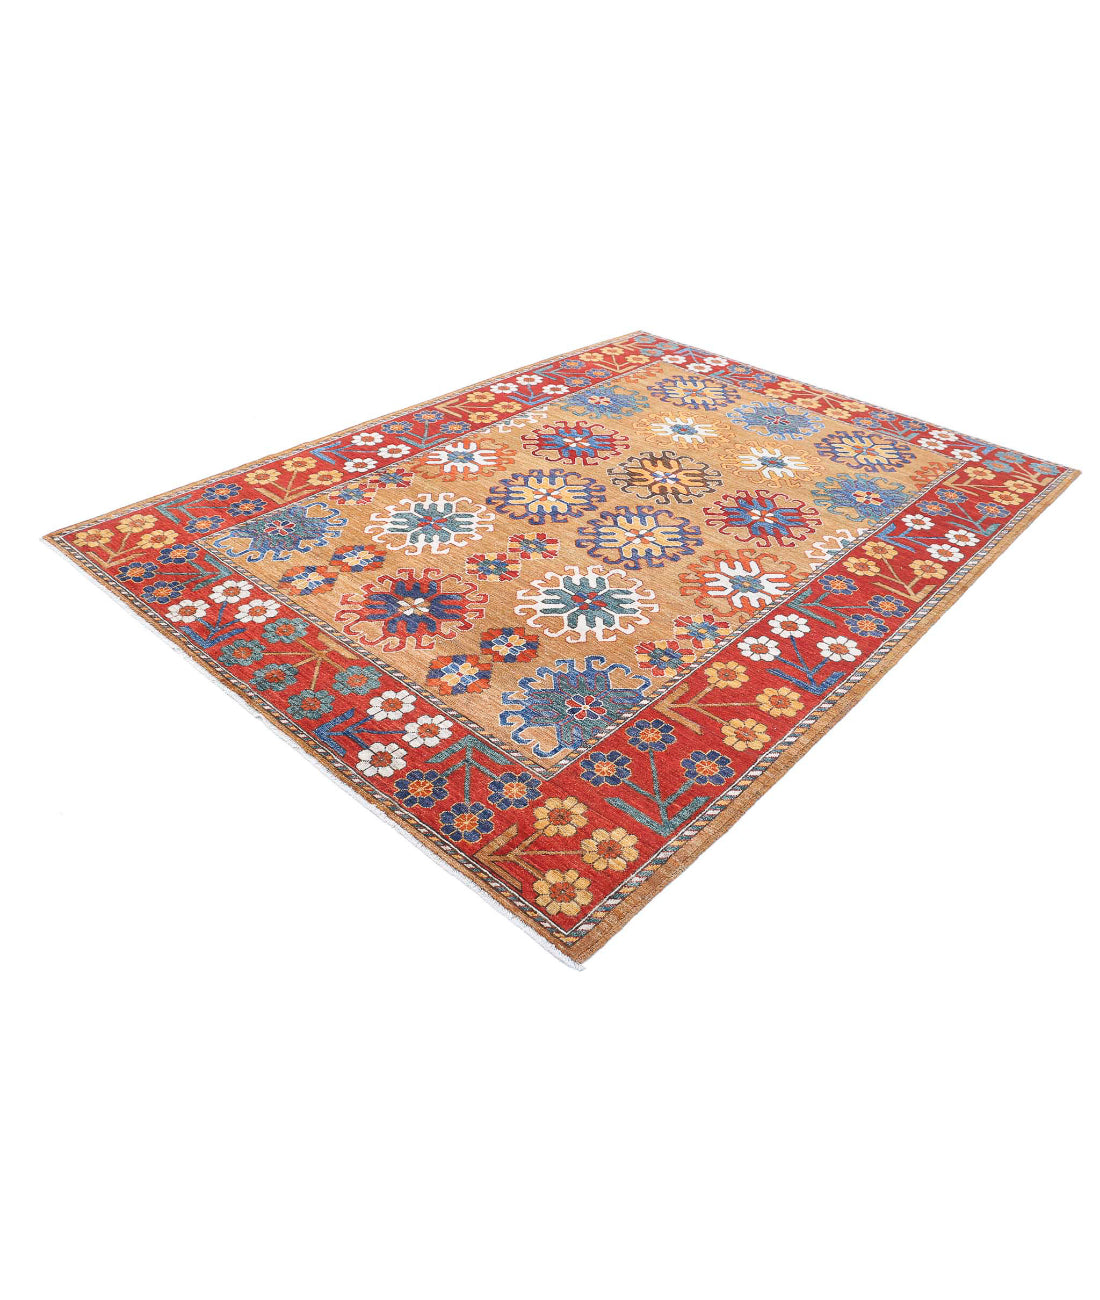 Hand Knotted Nomadic Caucasian Humna Wool Rug - 6'10'' x 9'5'' 6'10'' x 9'5'' (205 X 283) / Gold / Red